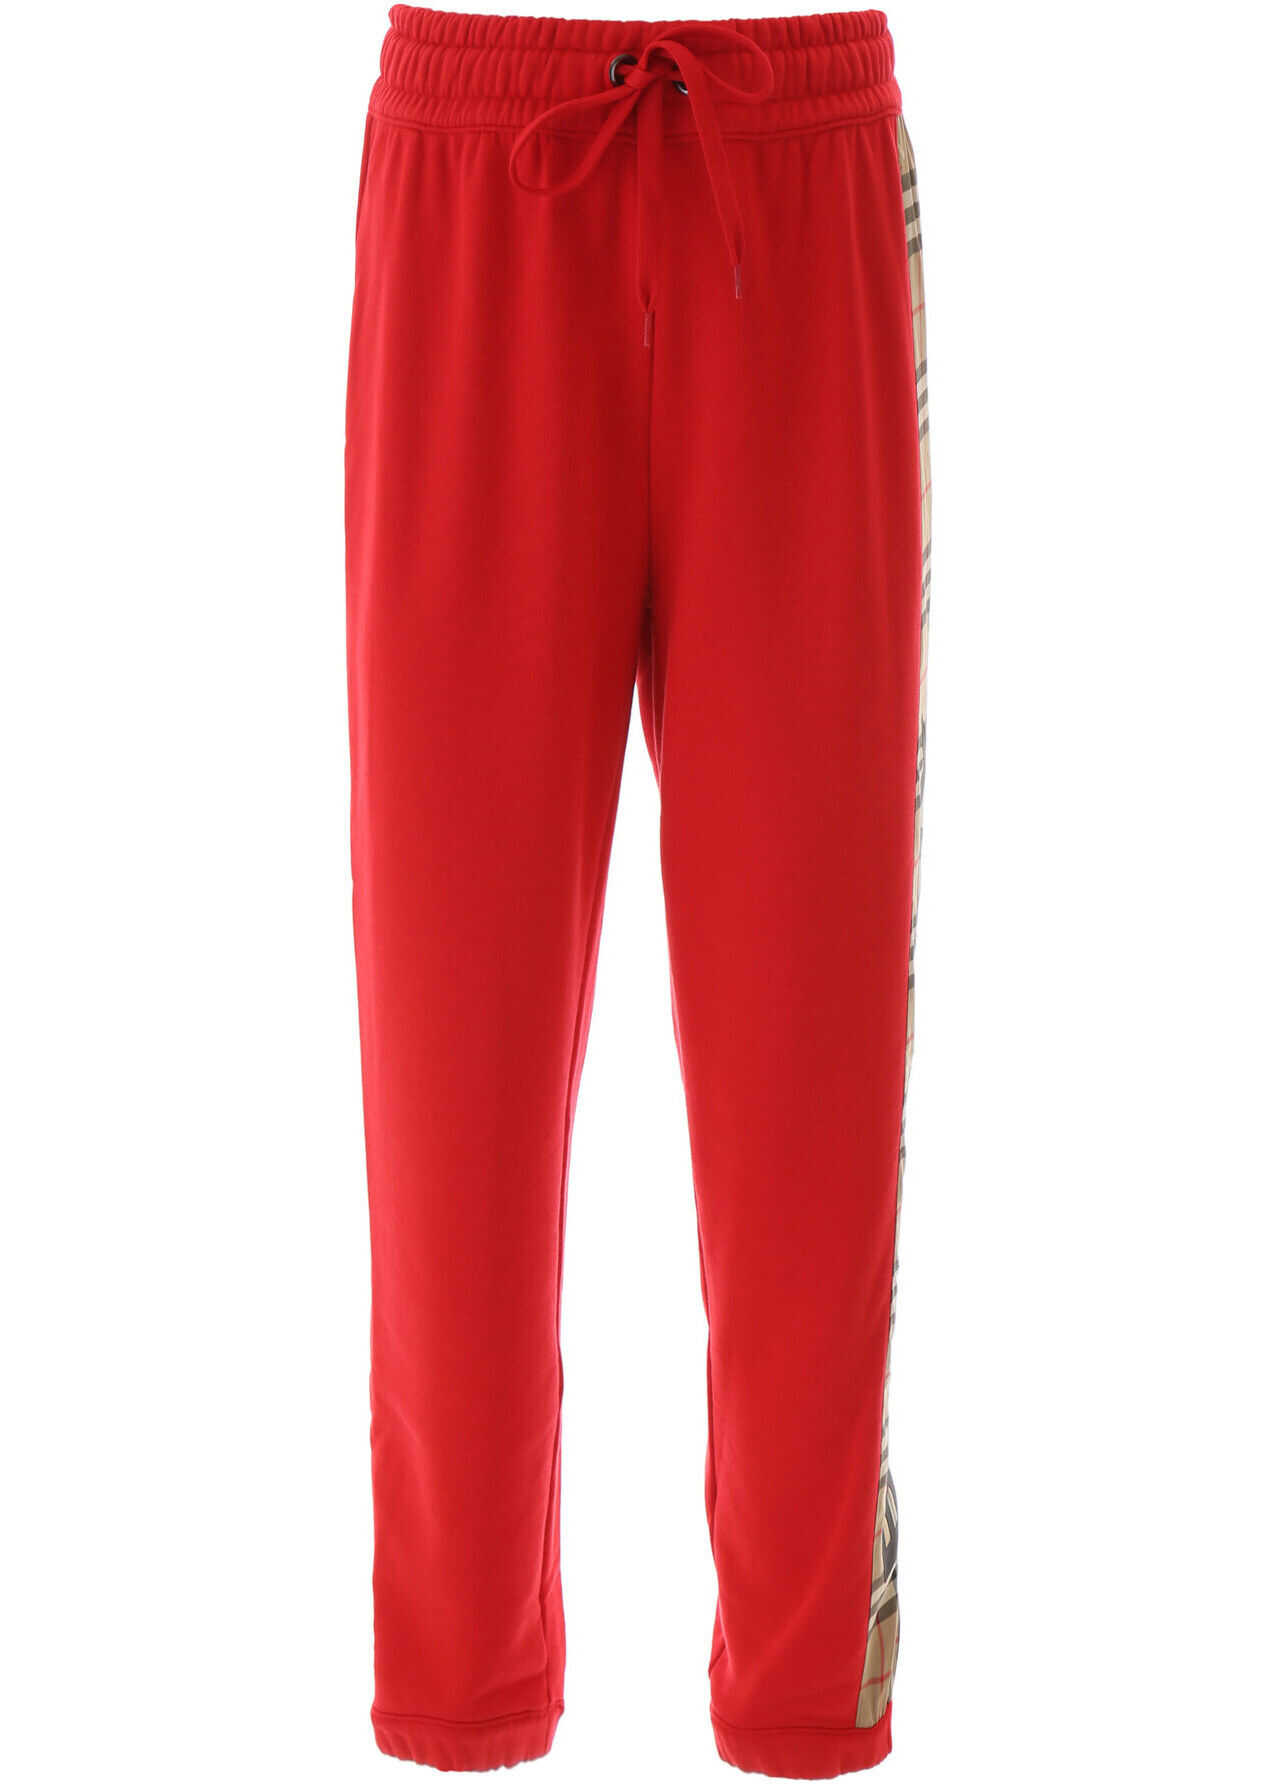 Burberry Raine Trousers With Check Insert* BRIGHT RED